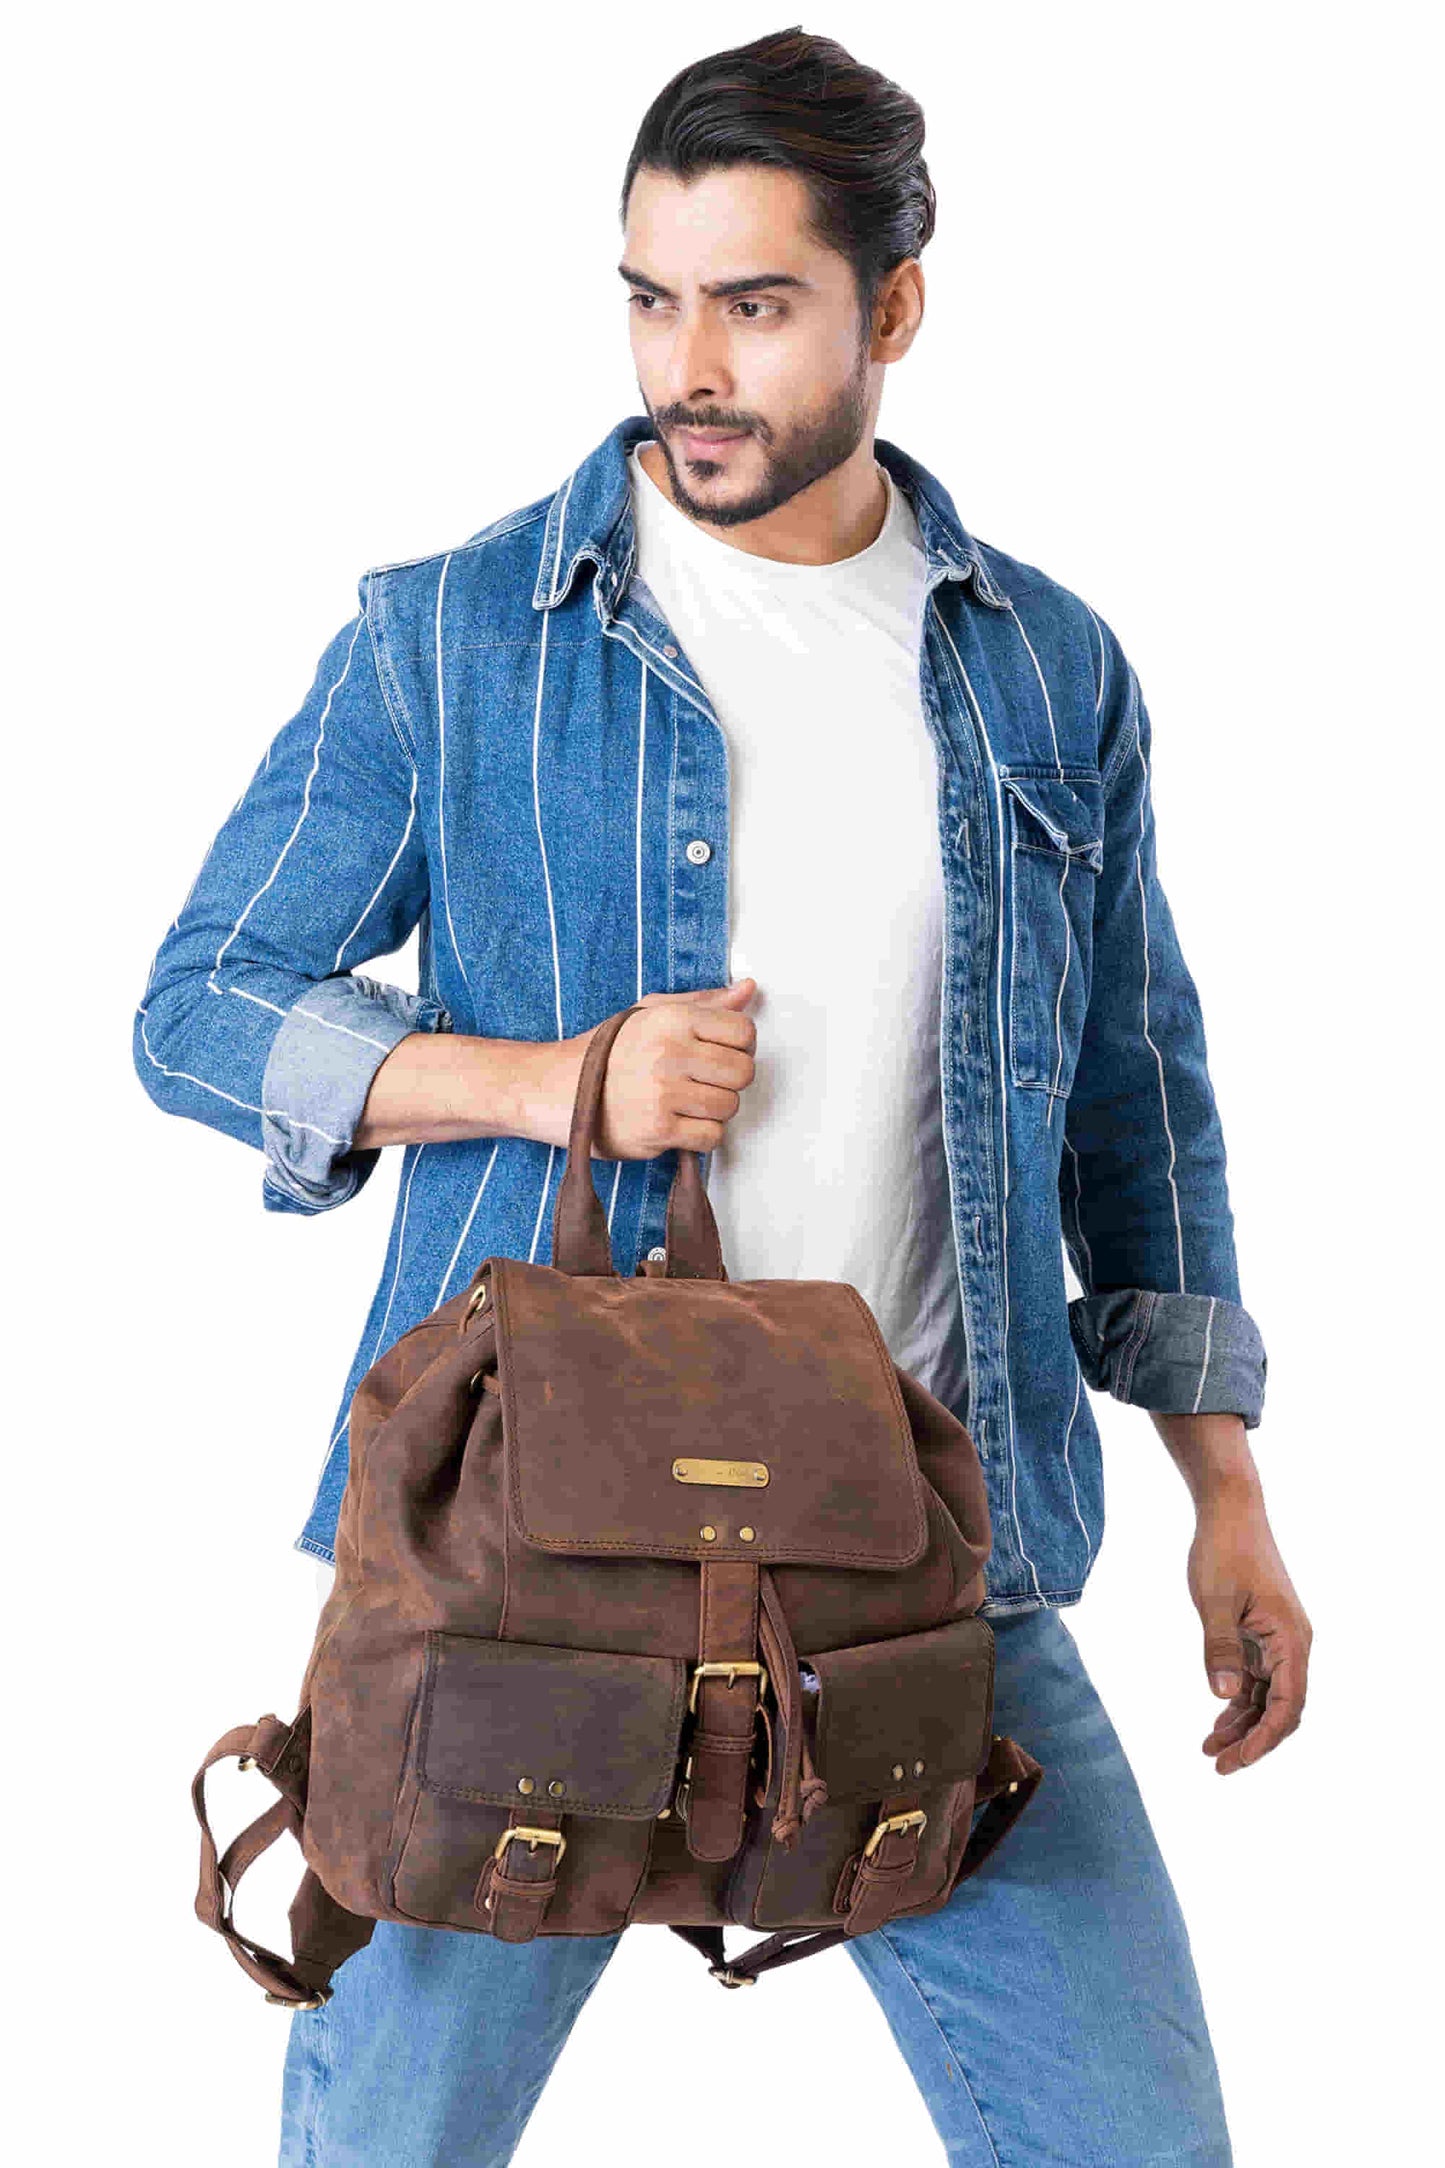 Style n Craft 392650 Backpack in Full Grain Dark Brown Hunter Leather - in use - holding the backpack by the top leather strap